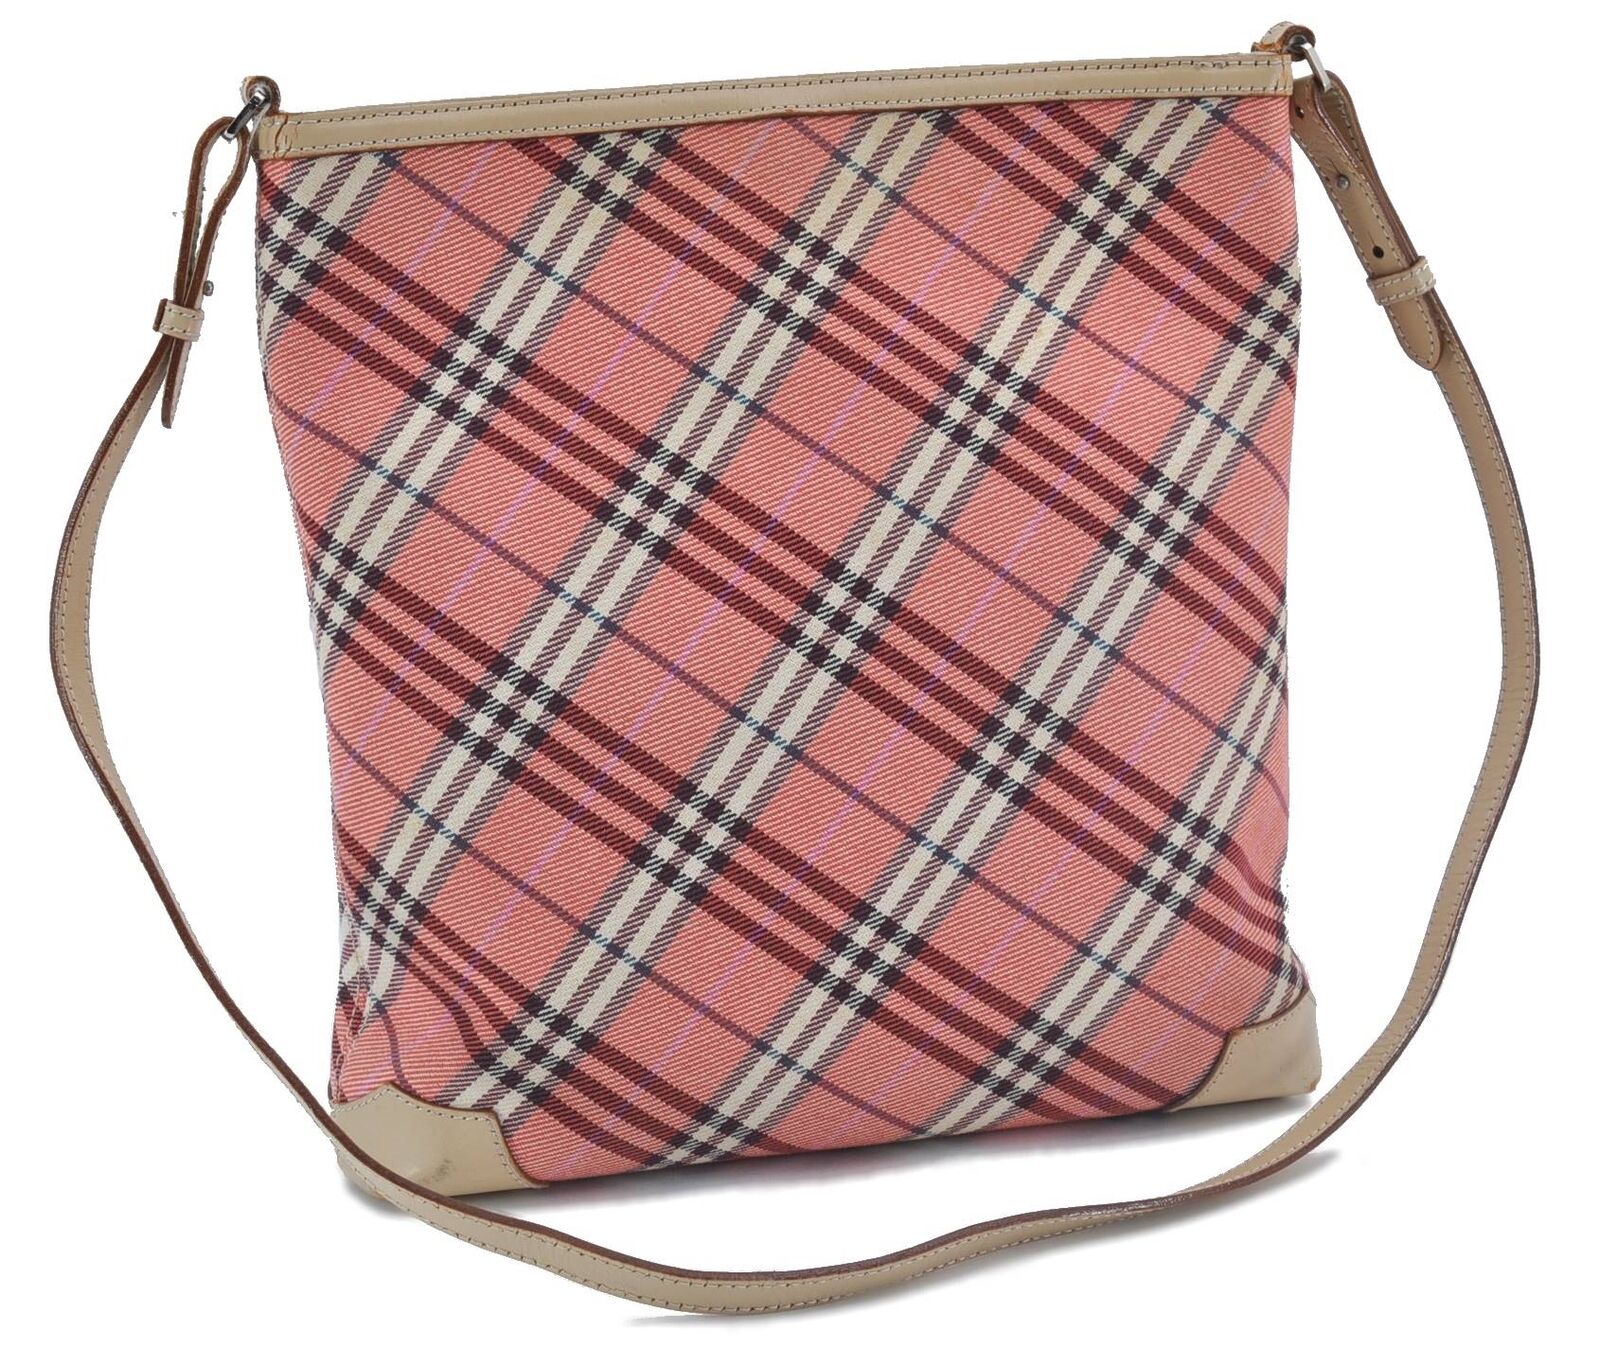 Auth BURBERRY BLUE LABEL Check Shoulder Cross Body Bag Canvas Leather Red H1388